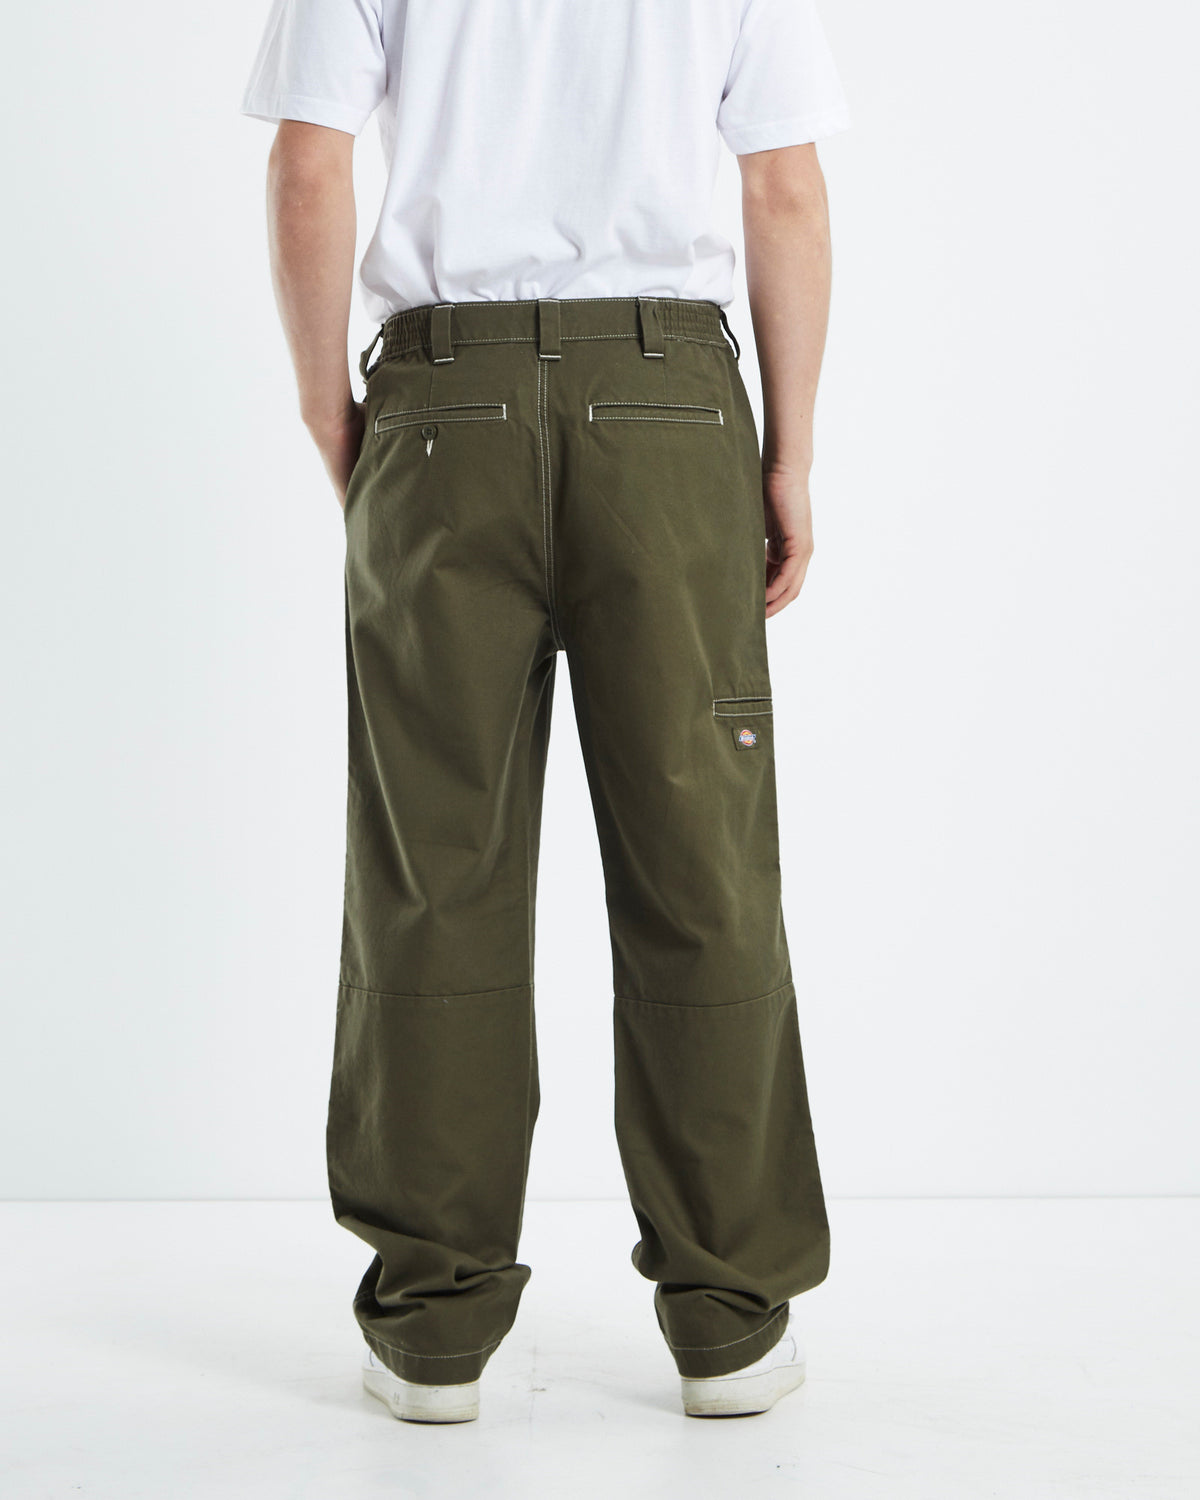 Constrast Cargo Pant - Military Green/Sand Stitch